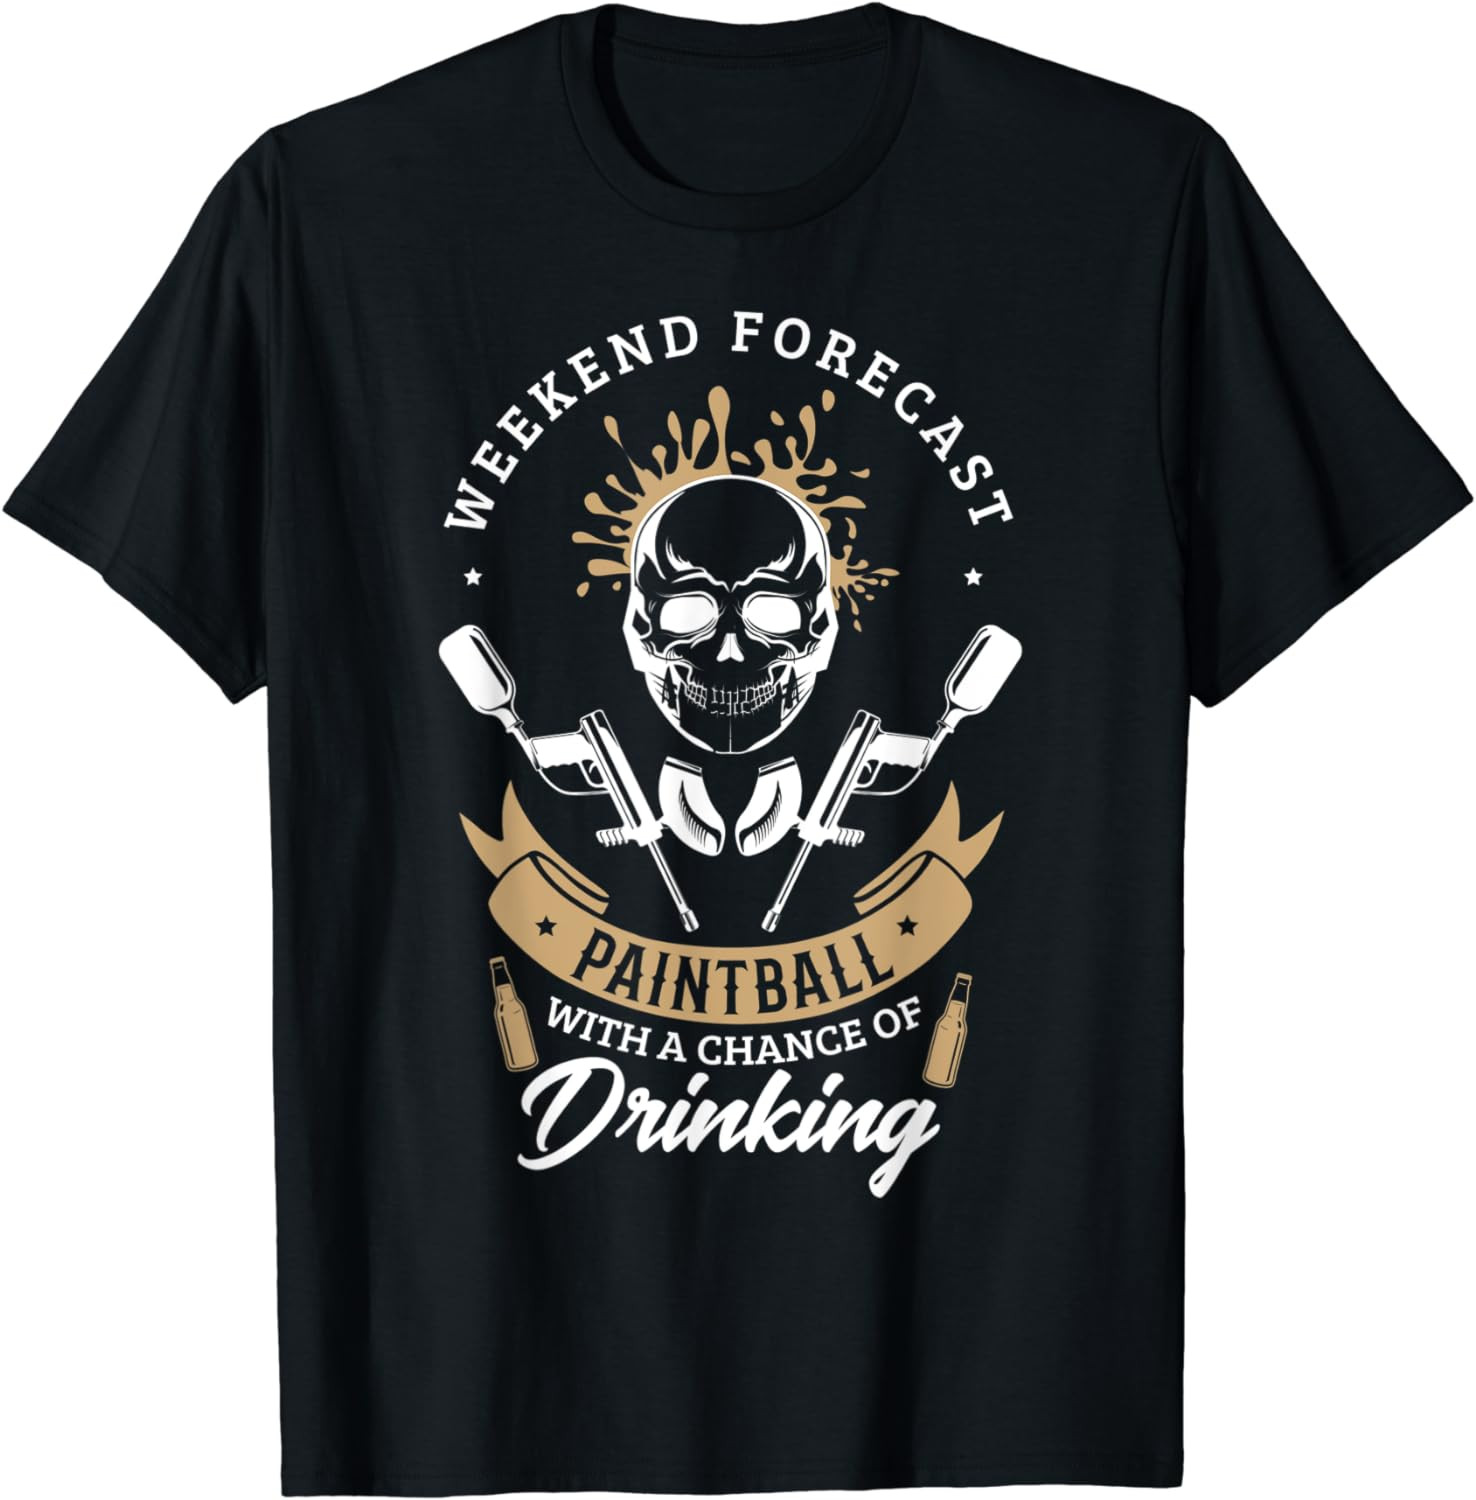 Weekend Forecast Paintball With A Chance Of Drinking T-Shirt